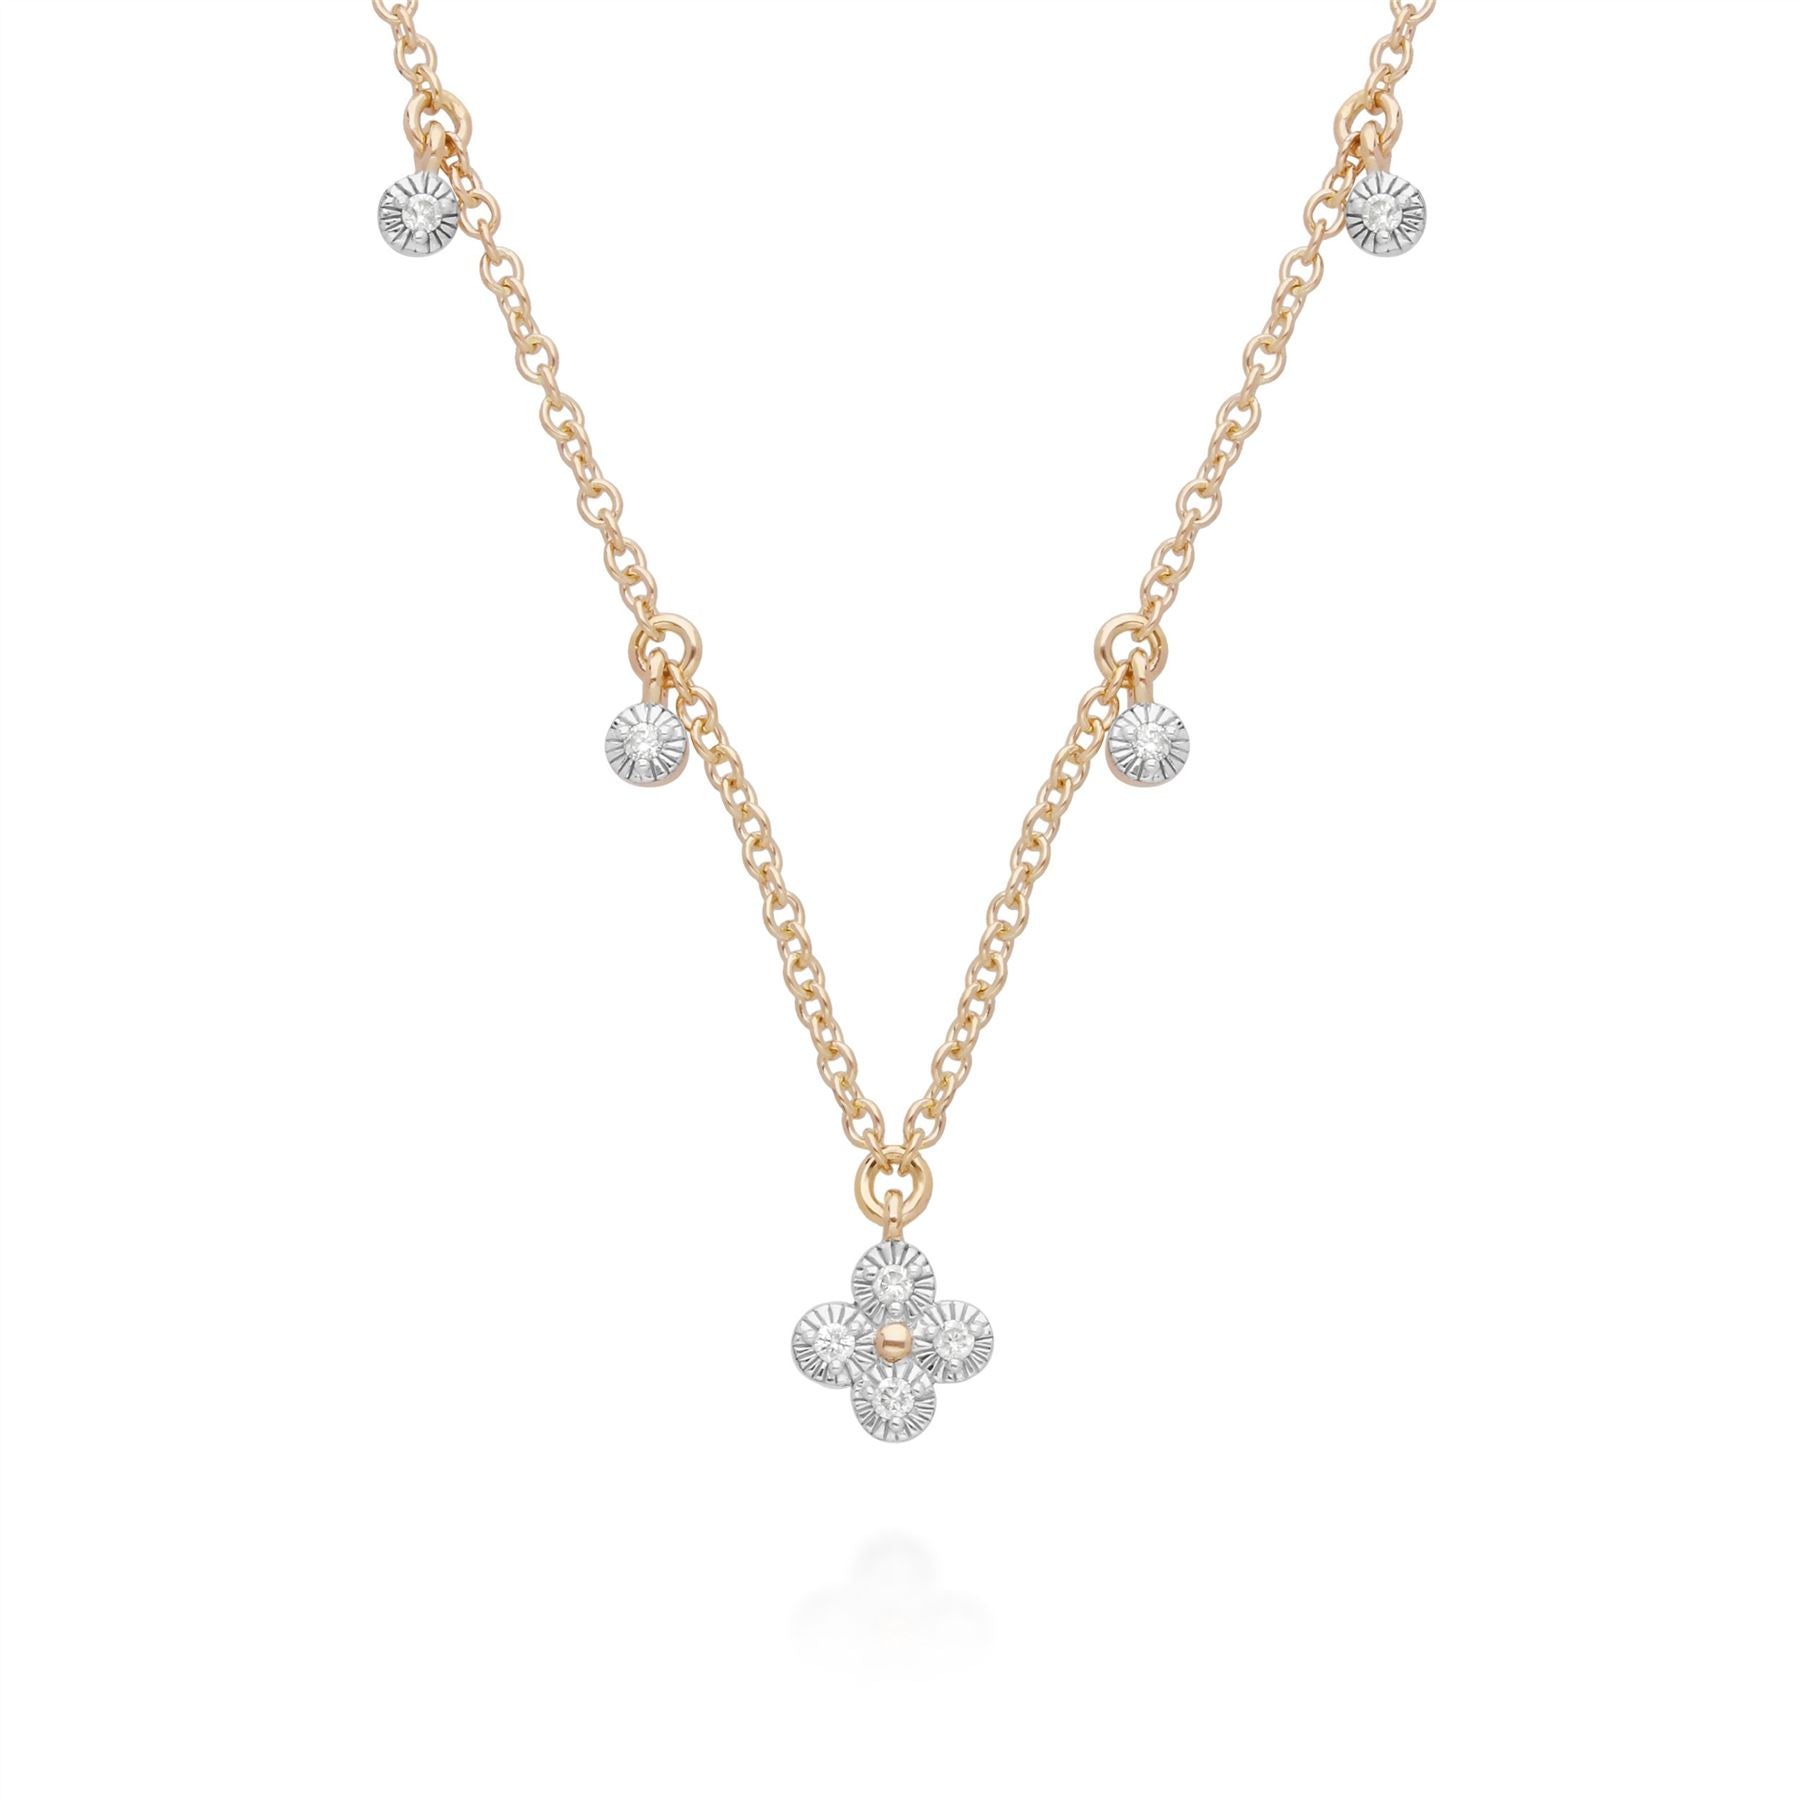 Diamond Flowers Choker Charm Necklace in 9ct Yellow Gold